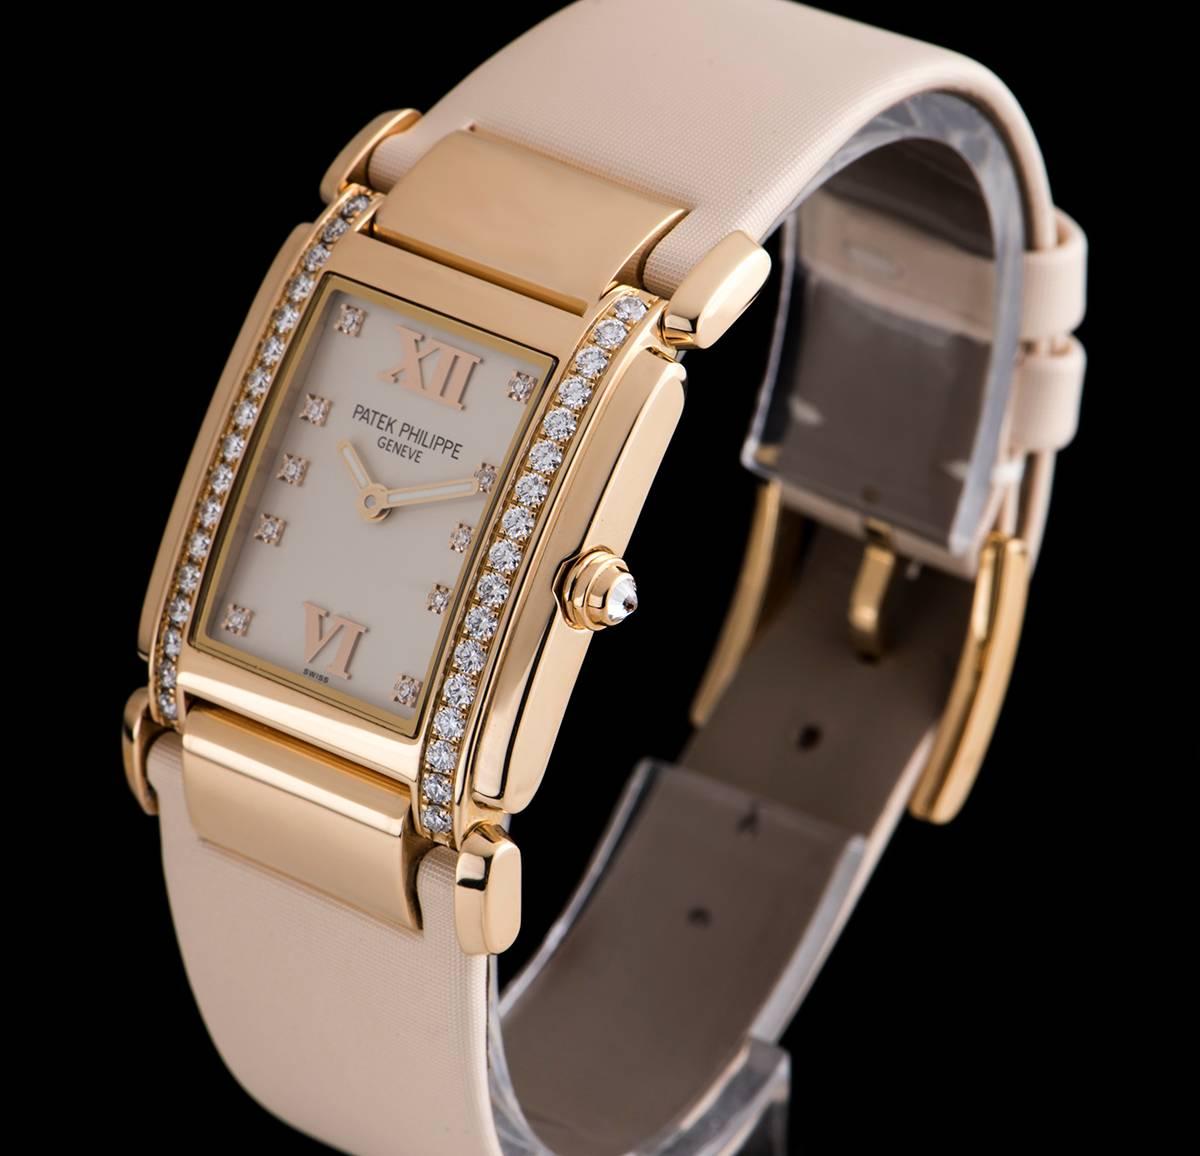 An 18k Rose Gold Twenty-4 Ladies Wristwatch, timeless white dial with 10 applied round brilliant cut diamond hour markers and applied roman numerals 